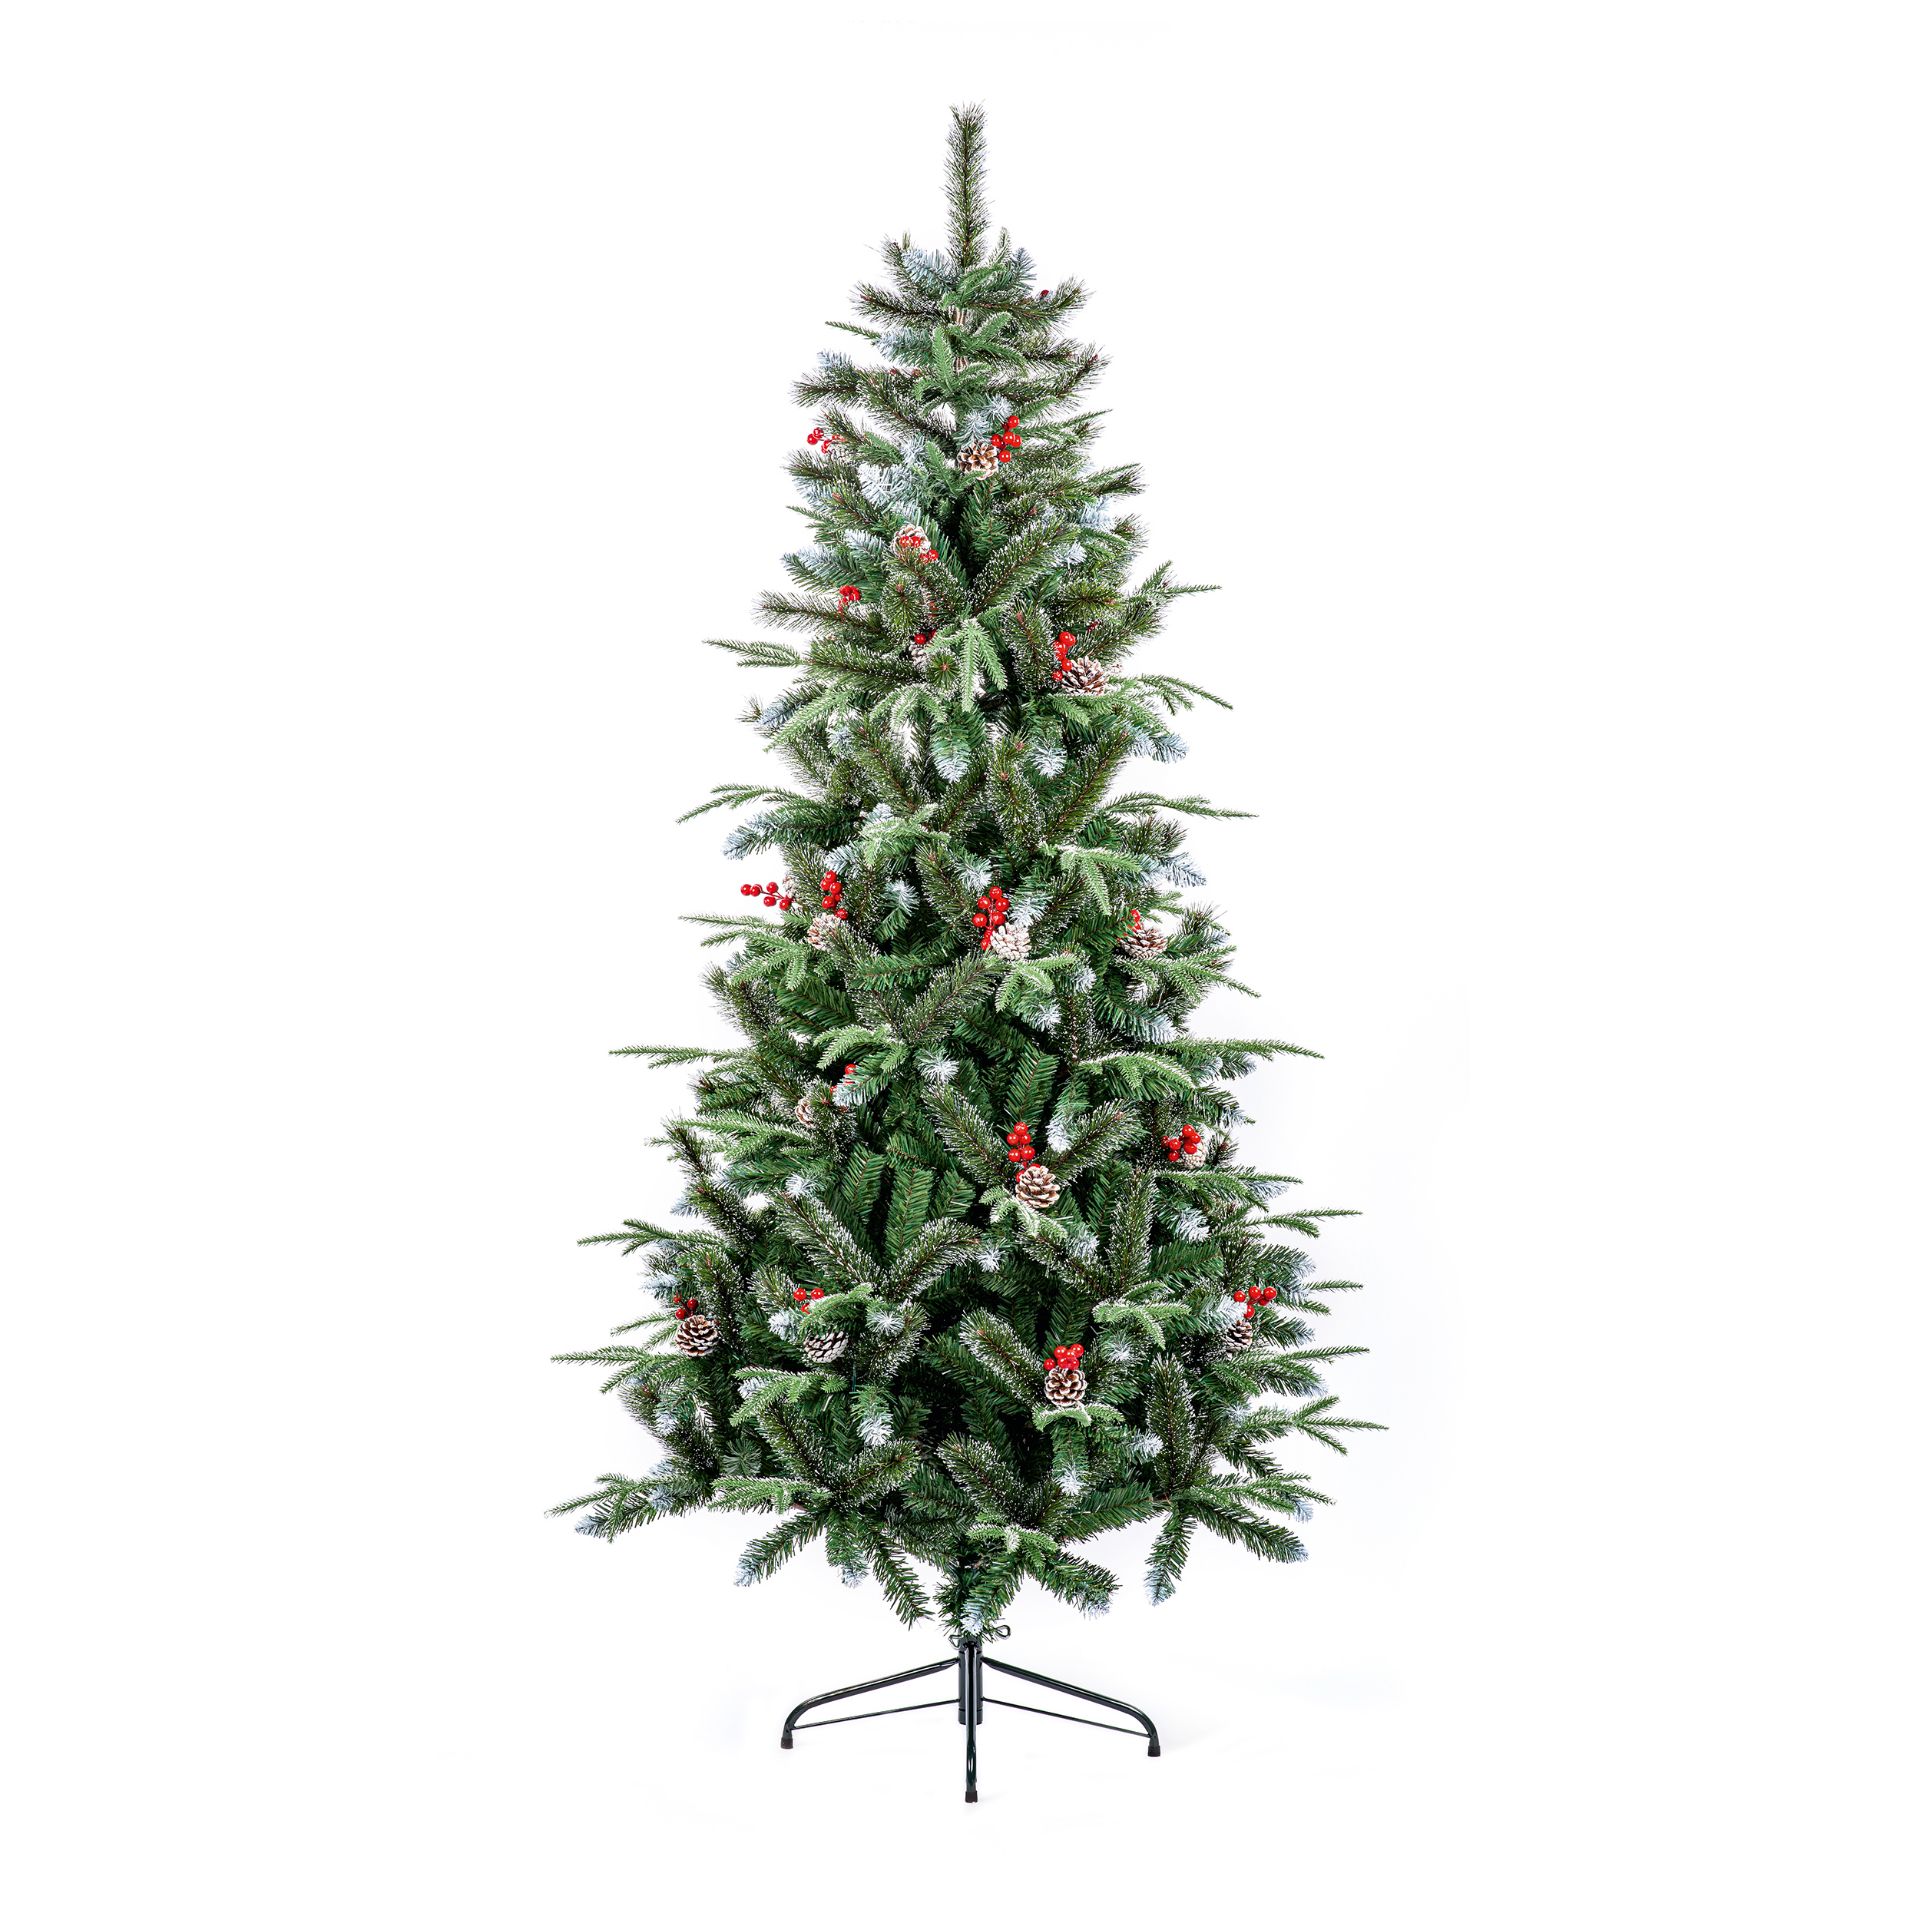 New Premier 1.8m Slim New Jersey Spruce Christmas Tree - PE/PVC w Cones and Berries - Image 3 of 6